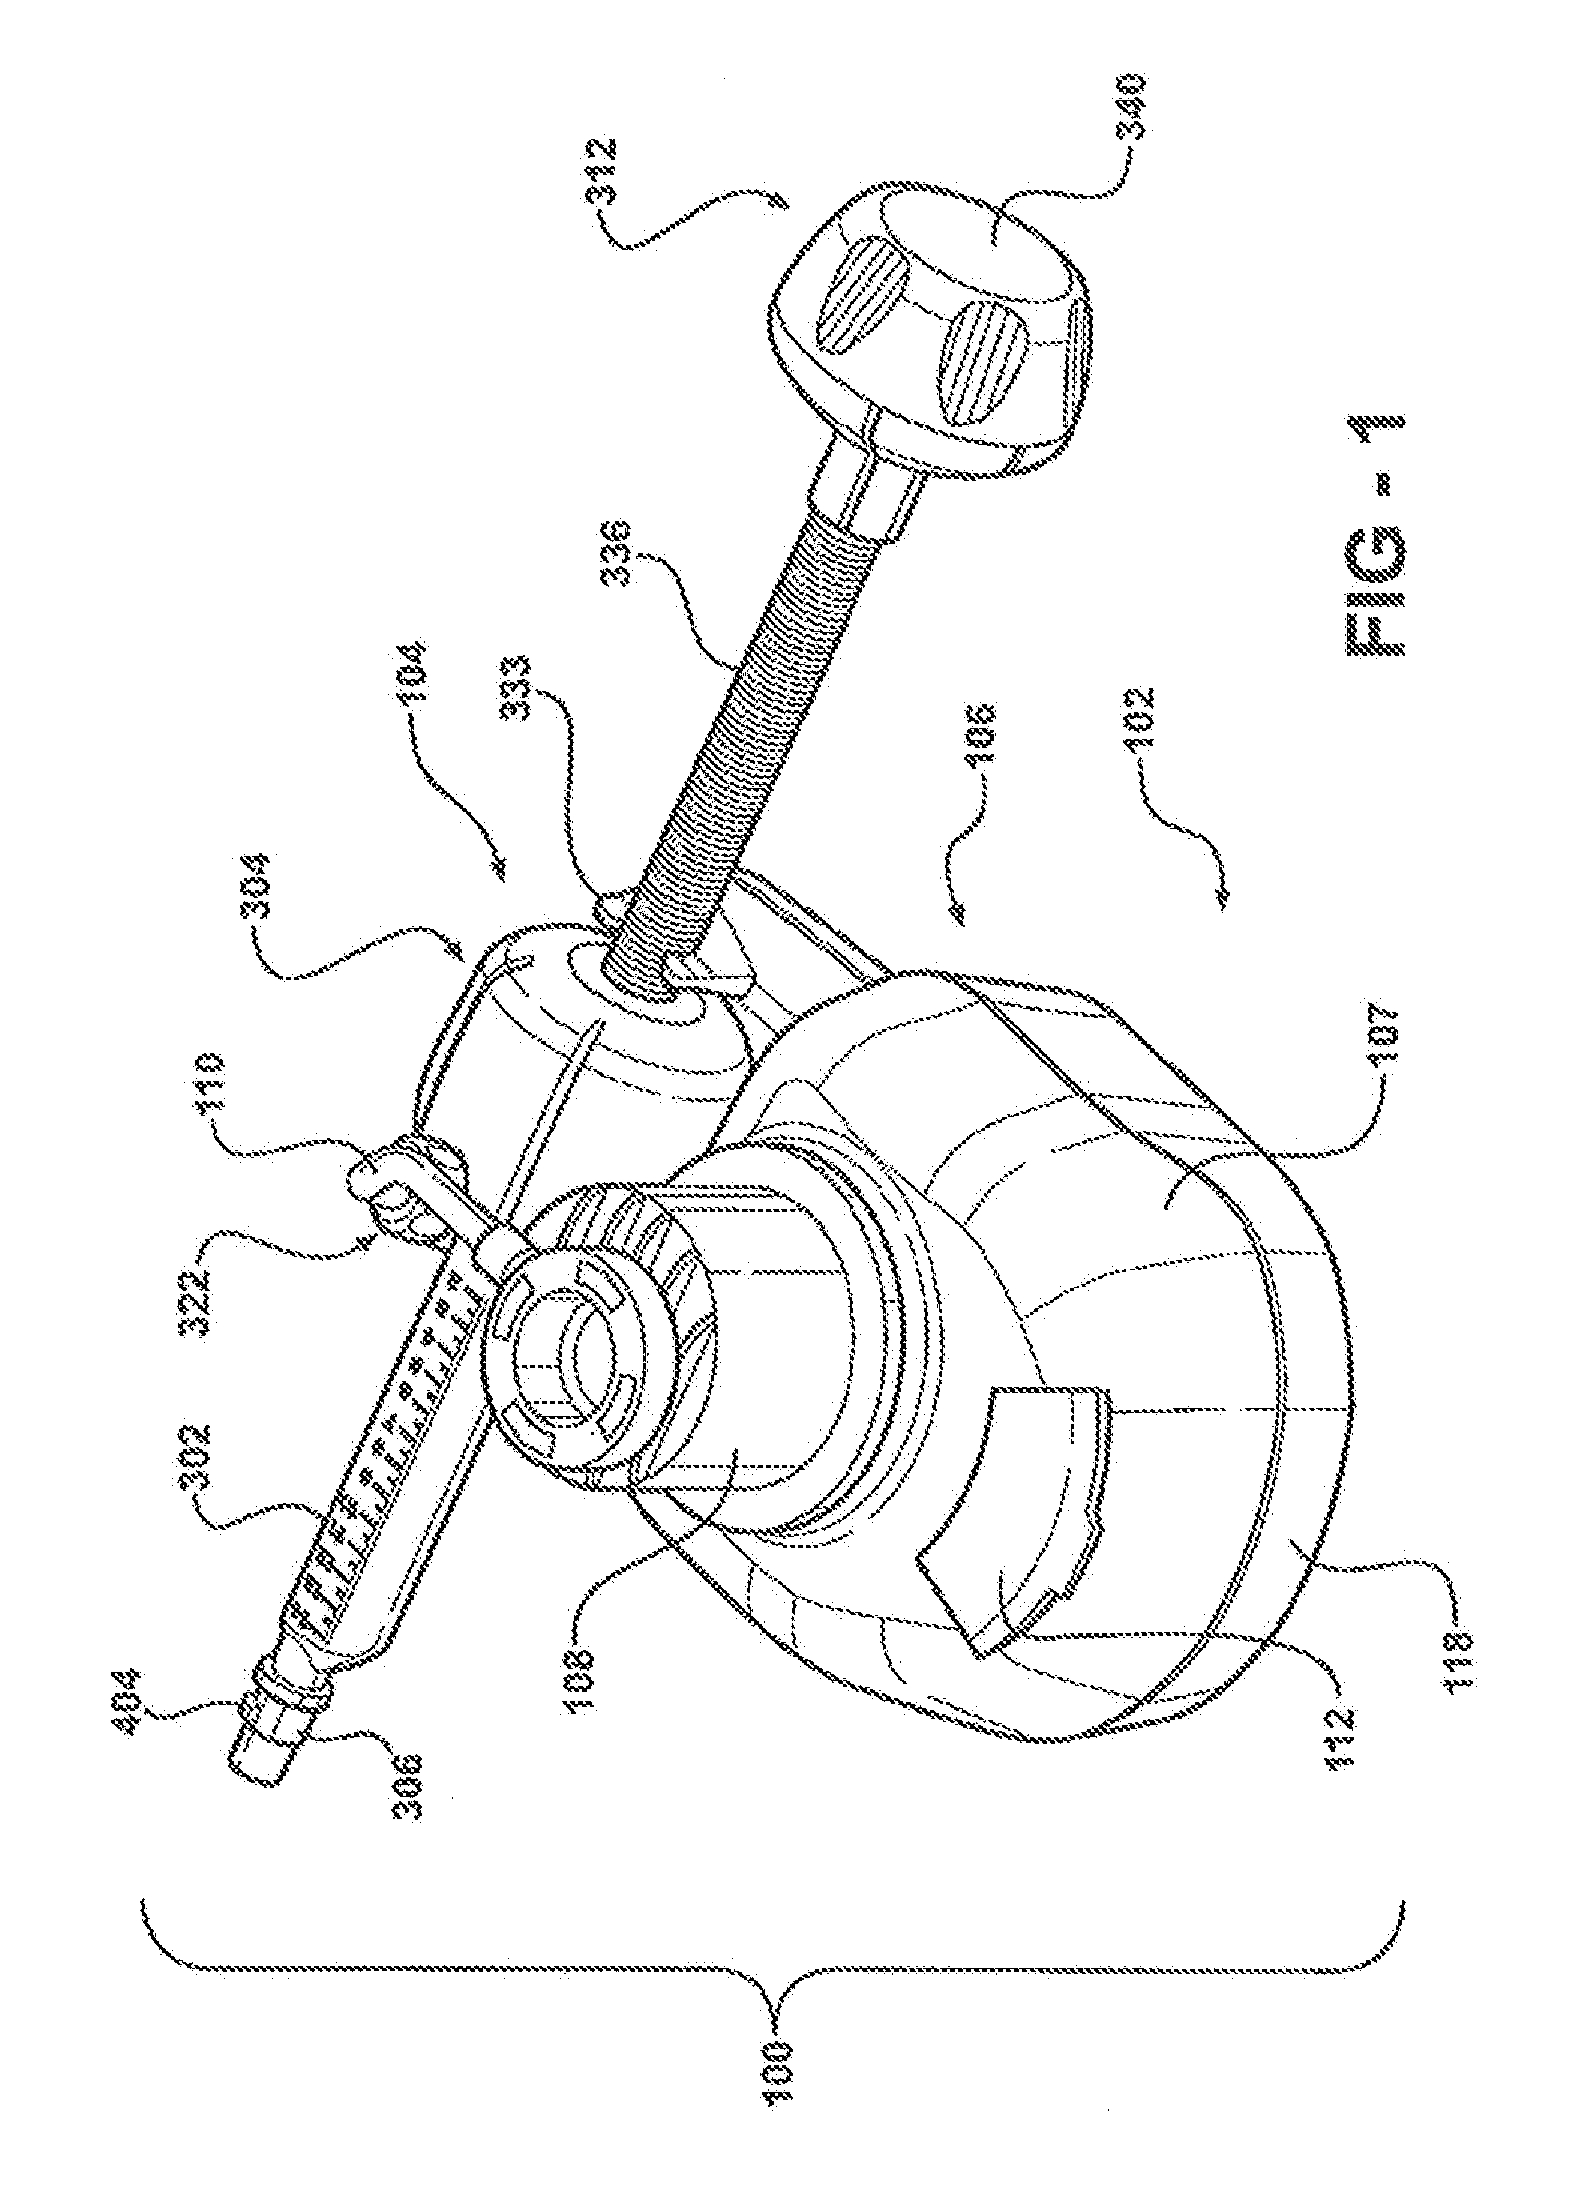 Medical cement monomer ampoule cartridge for storing the ampoule, opening the ampoule and selectively discharging the monomer from the ampoule